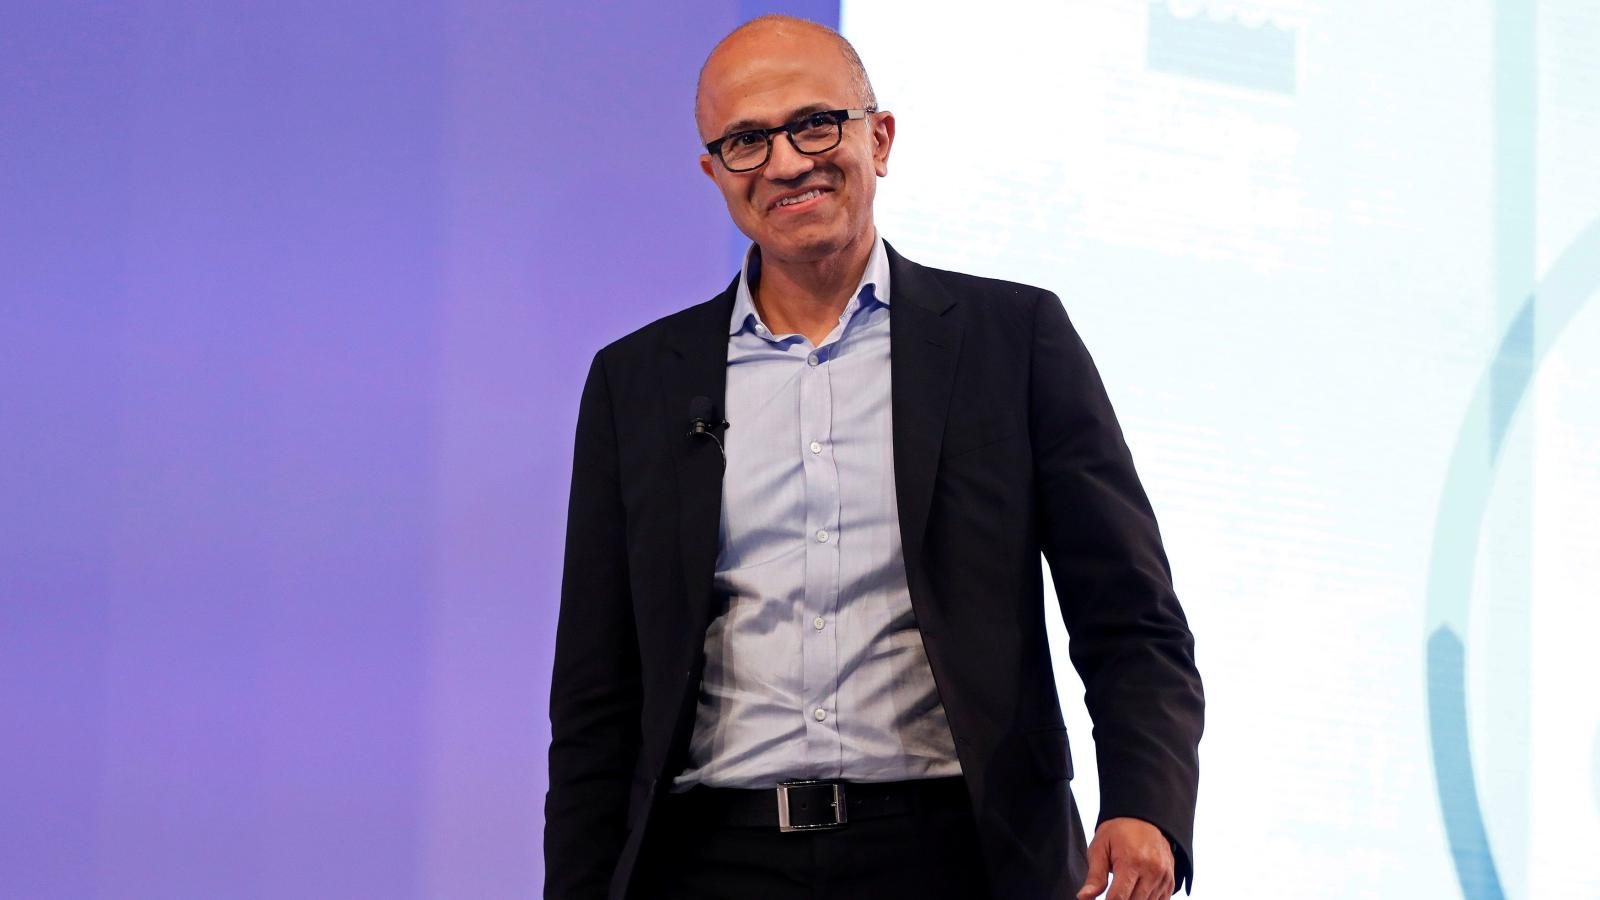 Career advice from Microsoft CEO Satya Nadella: Ask what your